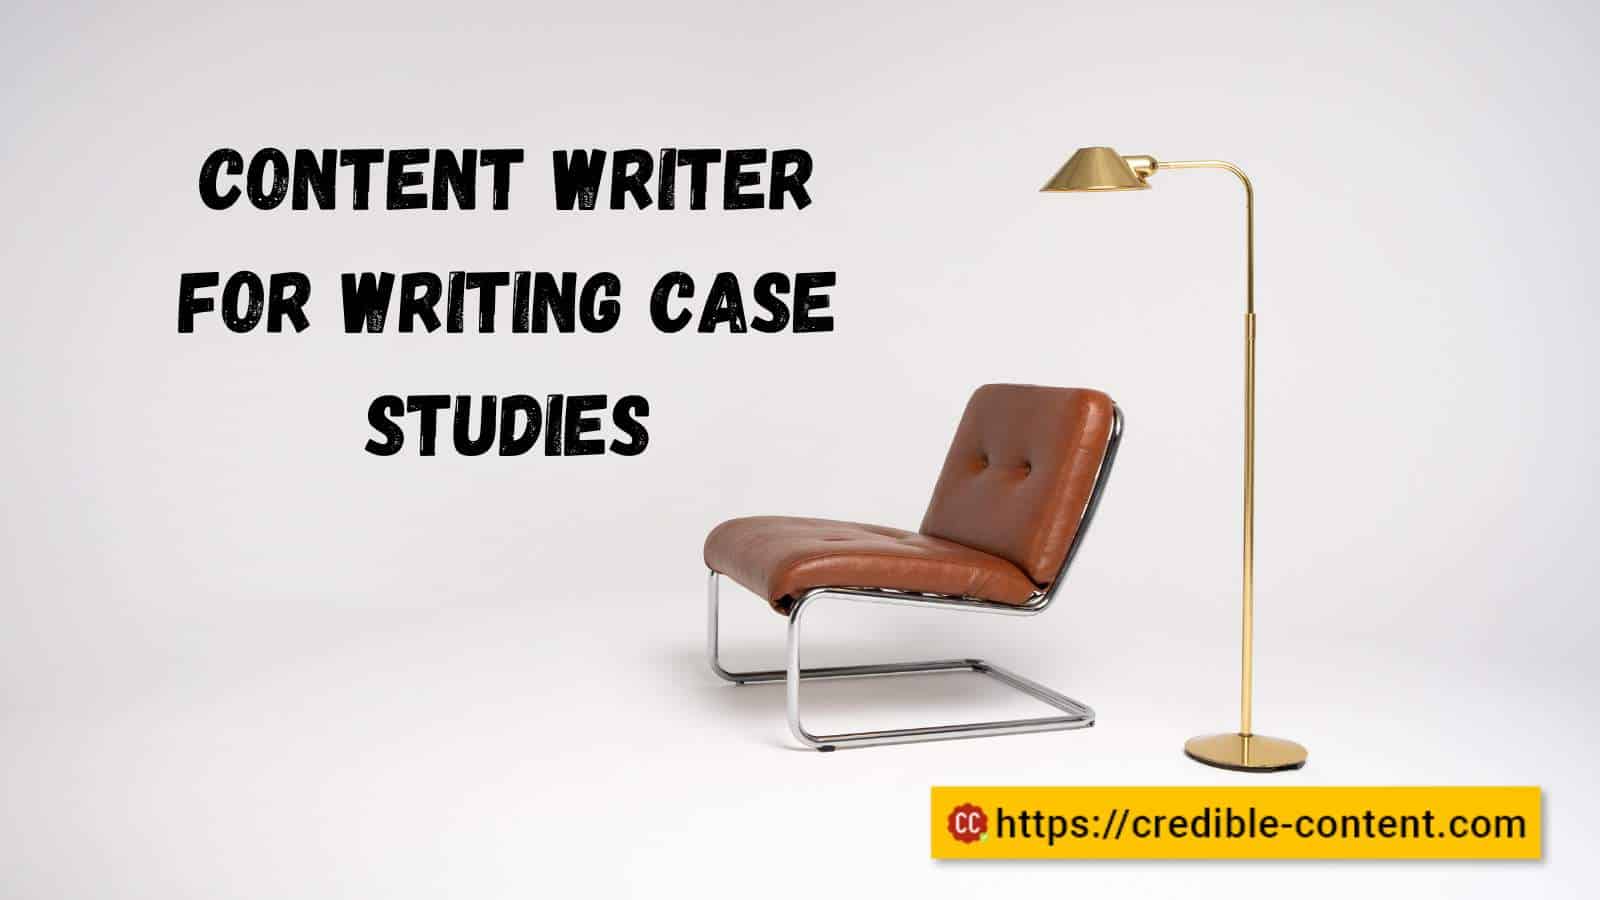 Content writer for writing case studies